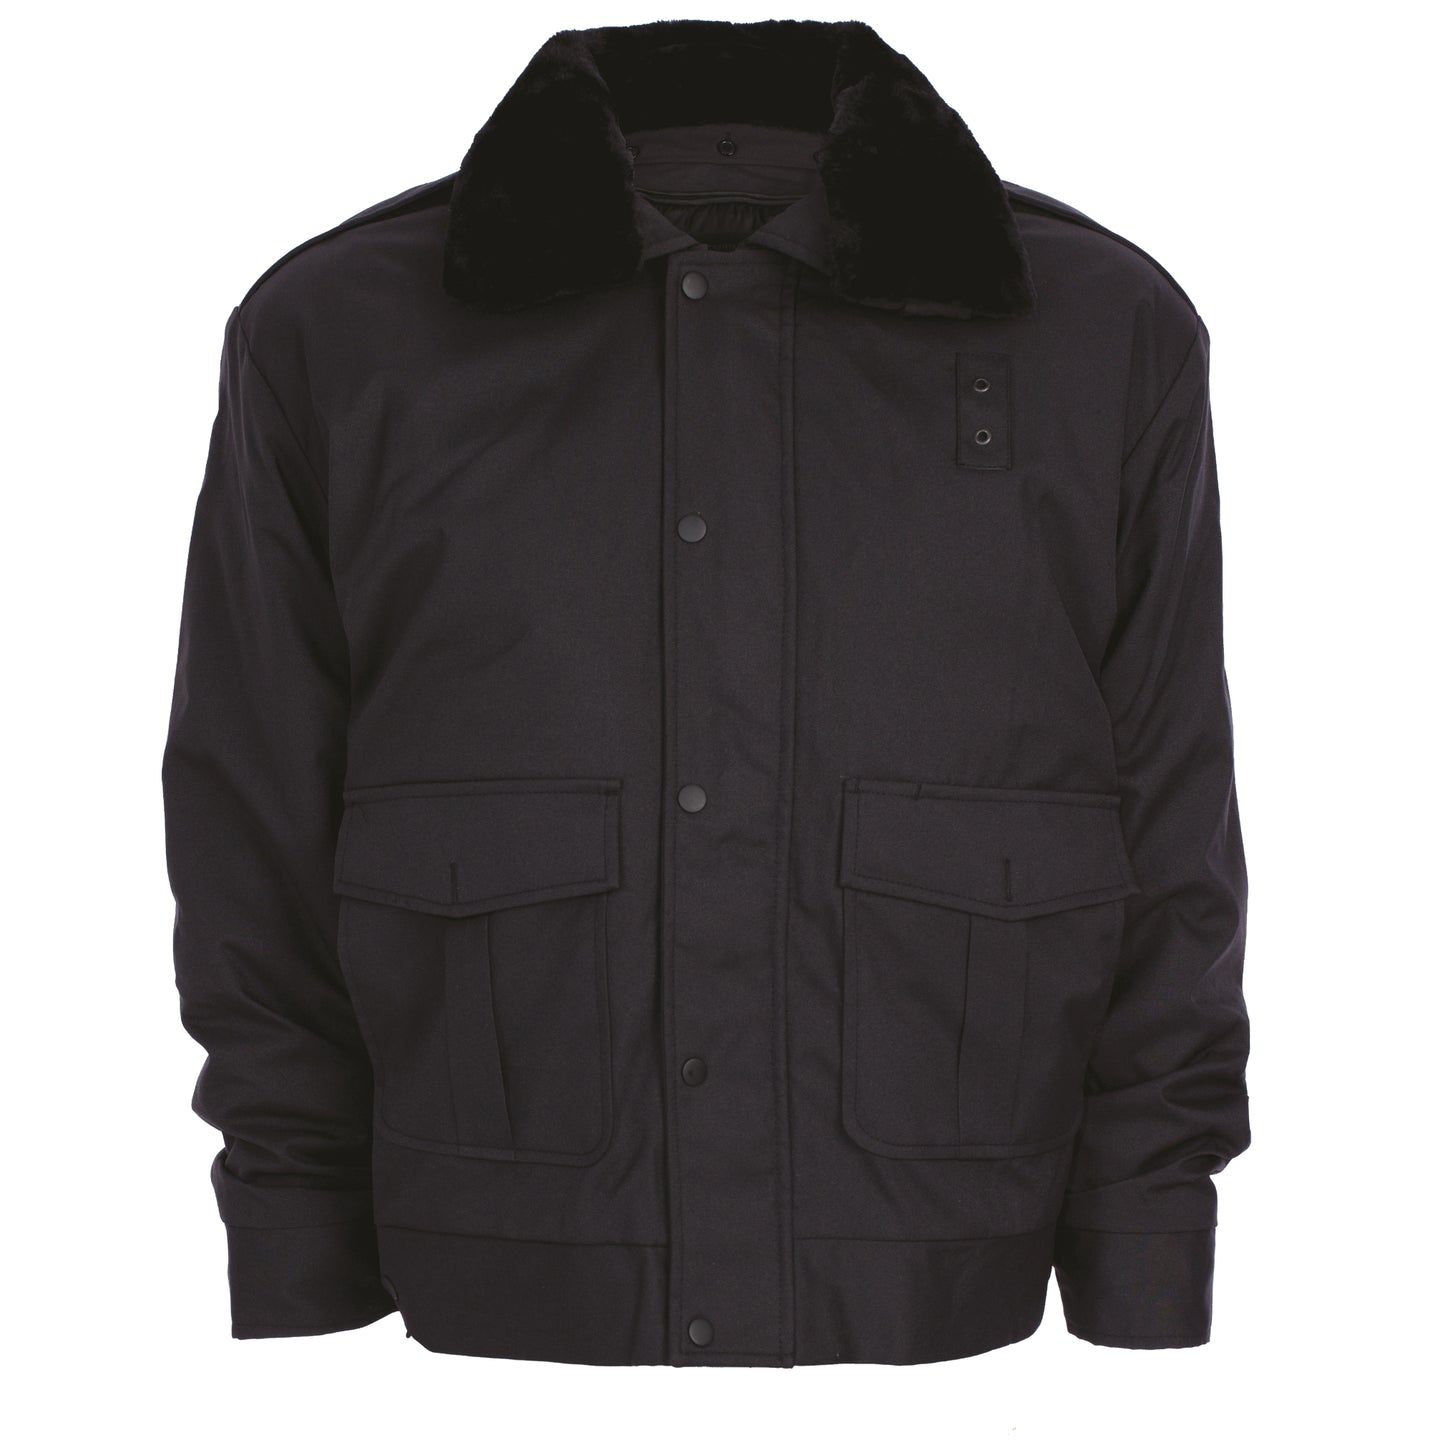 Deluxe Heavy Duty Jacket w/ Removable Liner